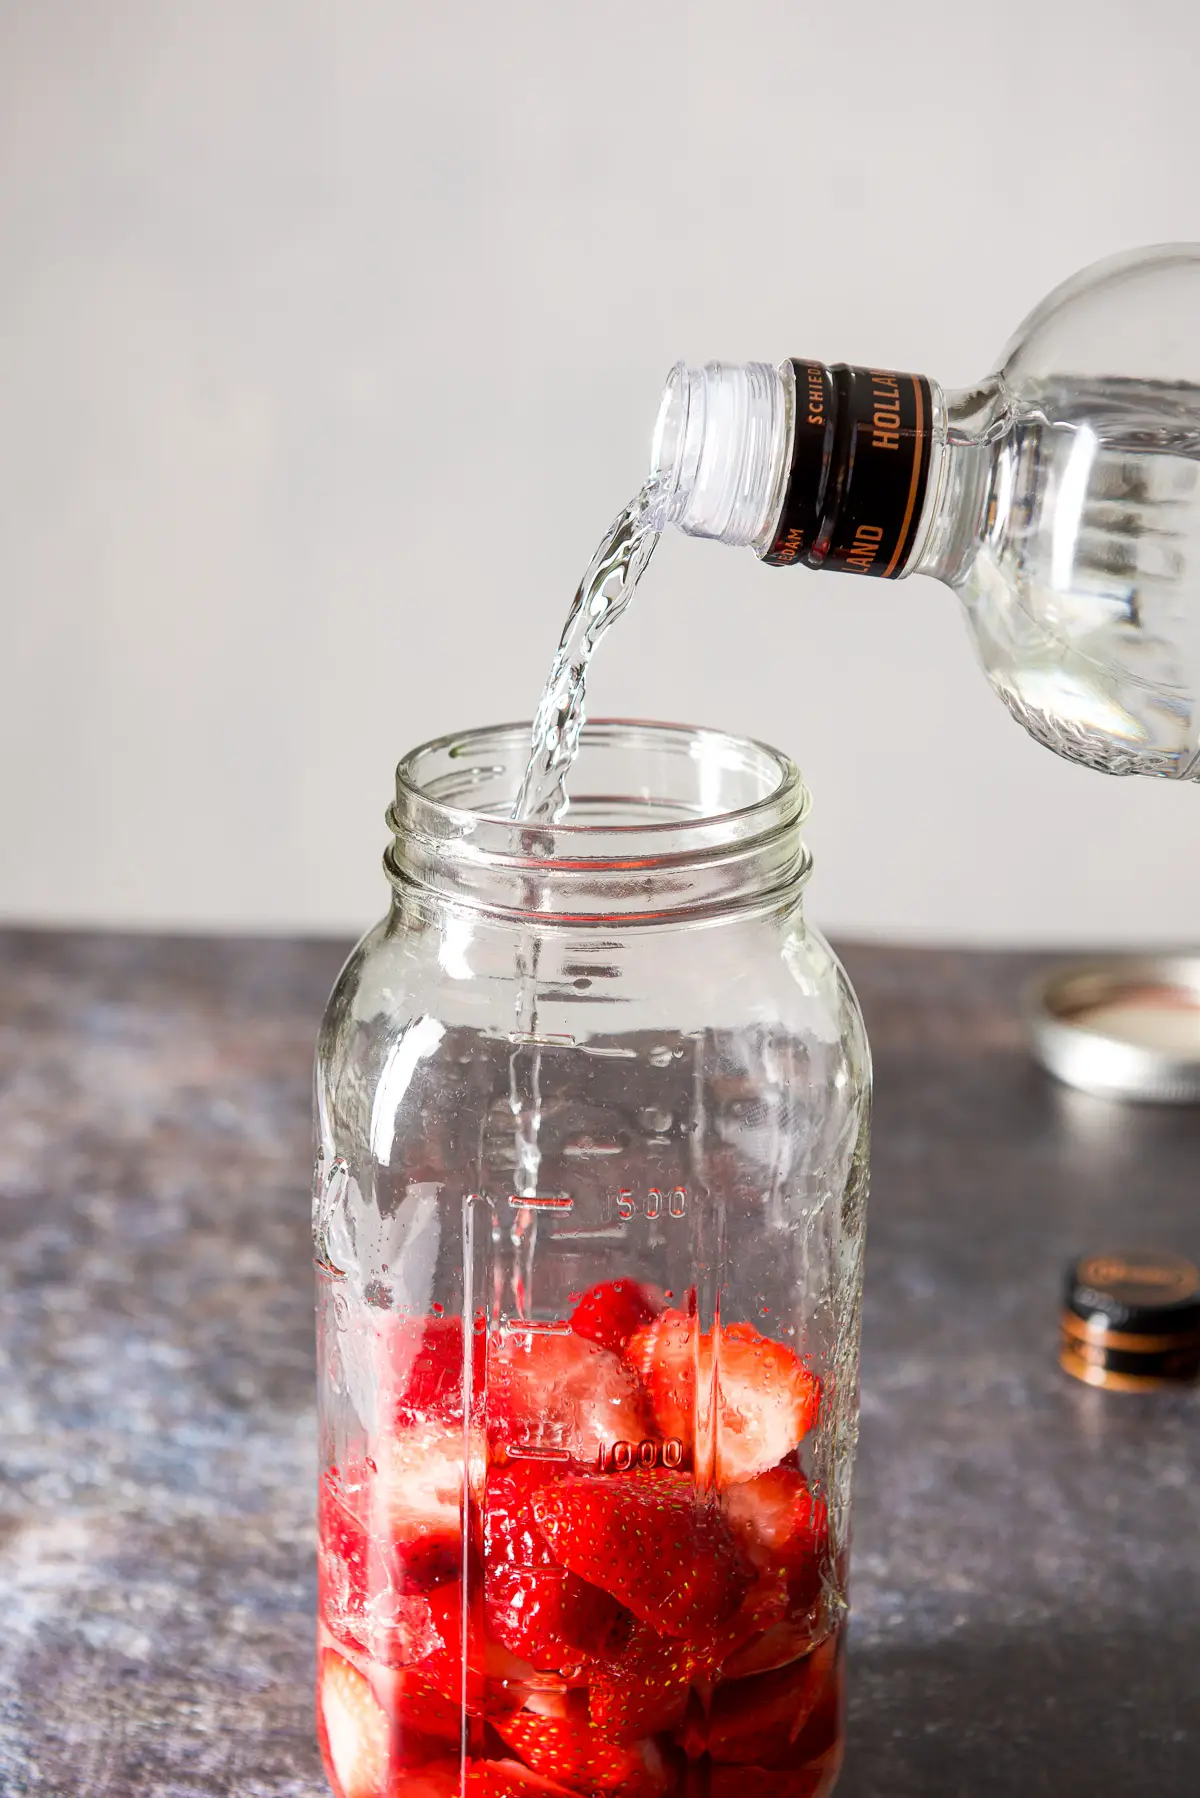 A jar with cut strawberries filled halfway and a bottle of vodka being poured into the jar